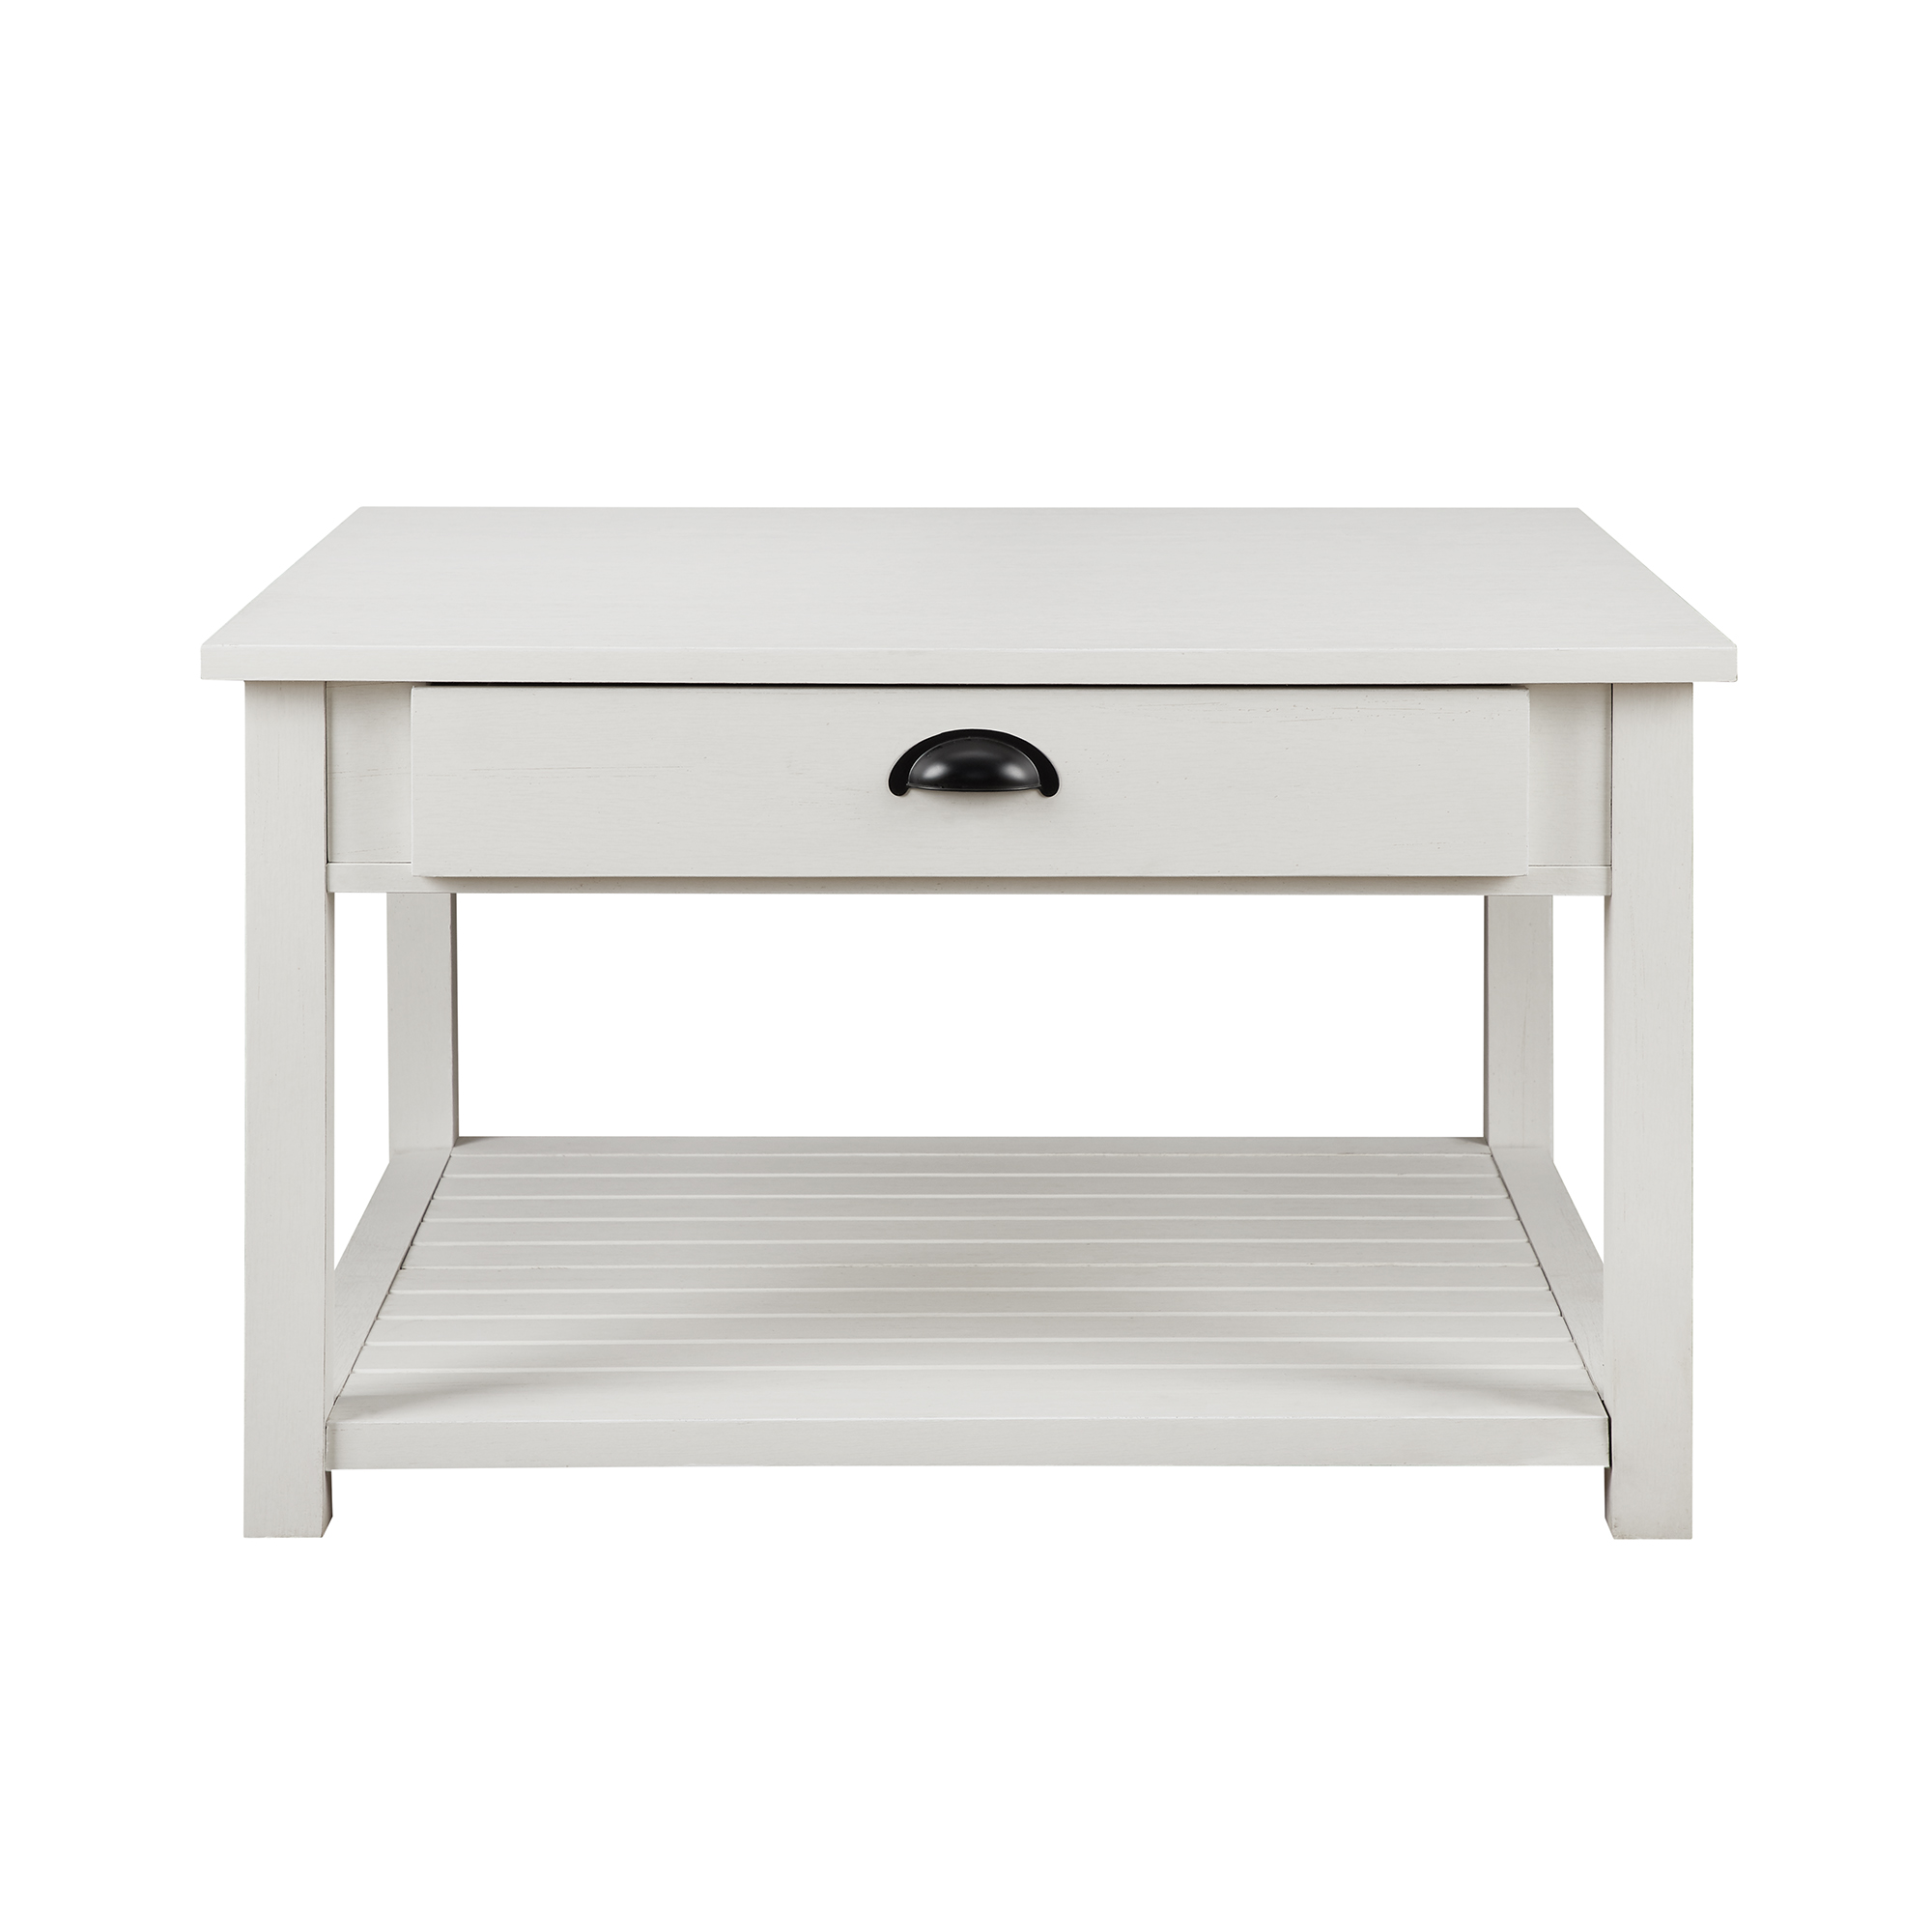 Manor Park 30 inch Square Country Coffee Table, Brushed White - image 2 of 10